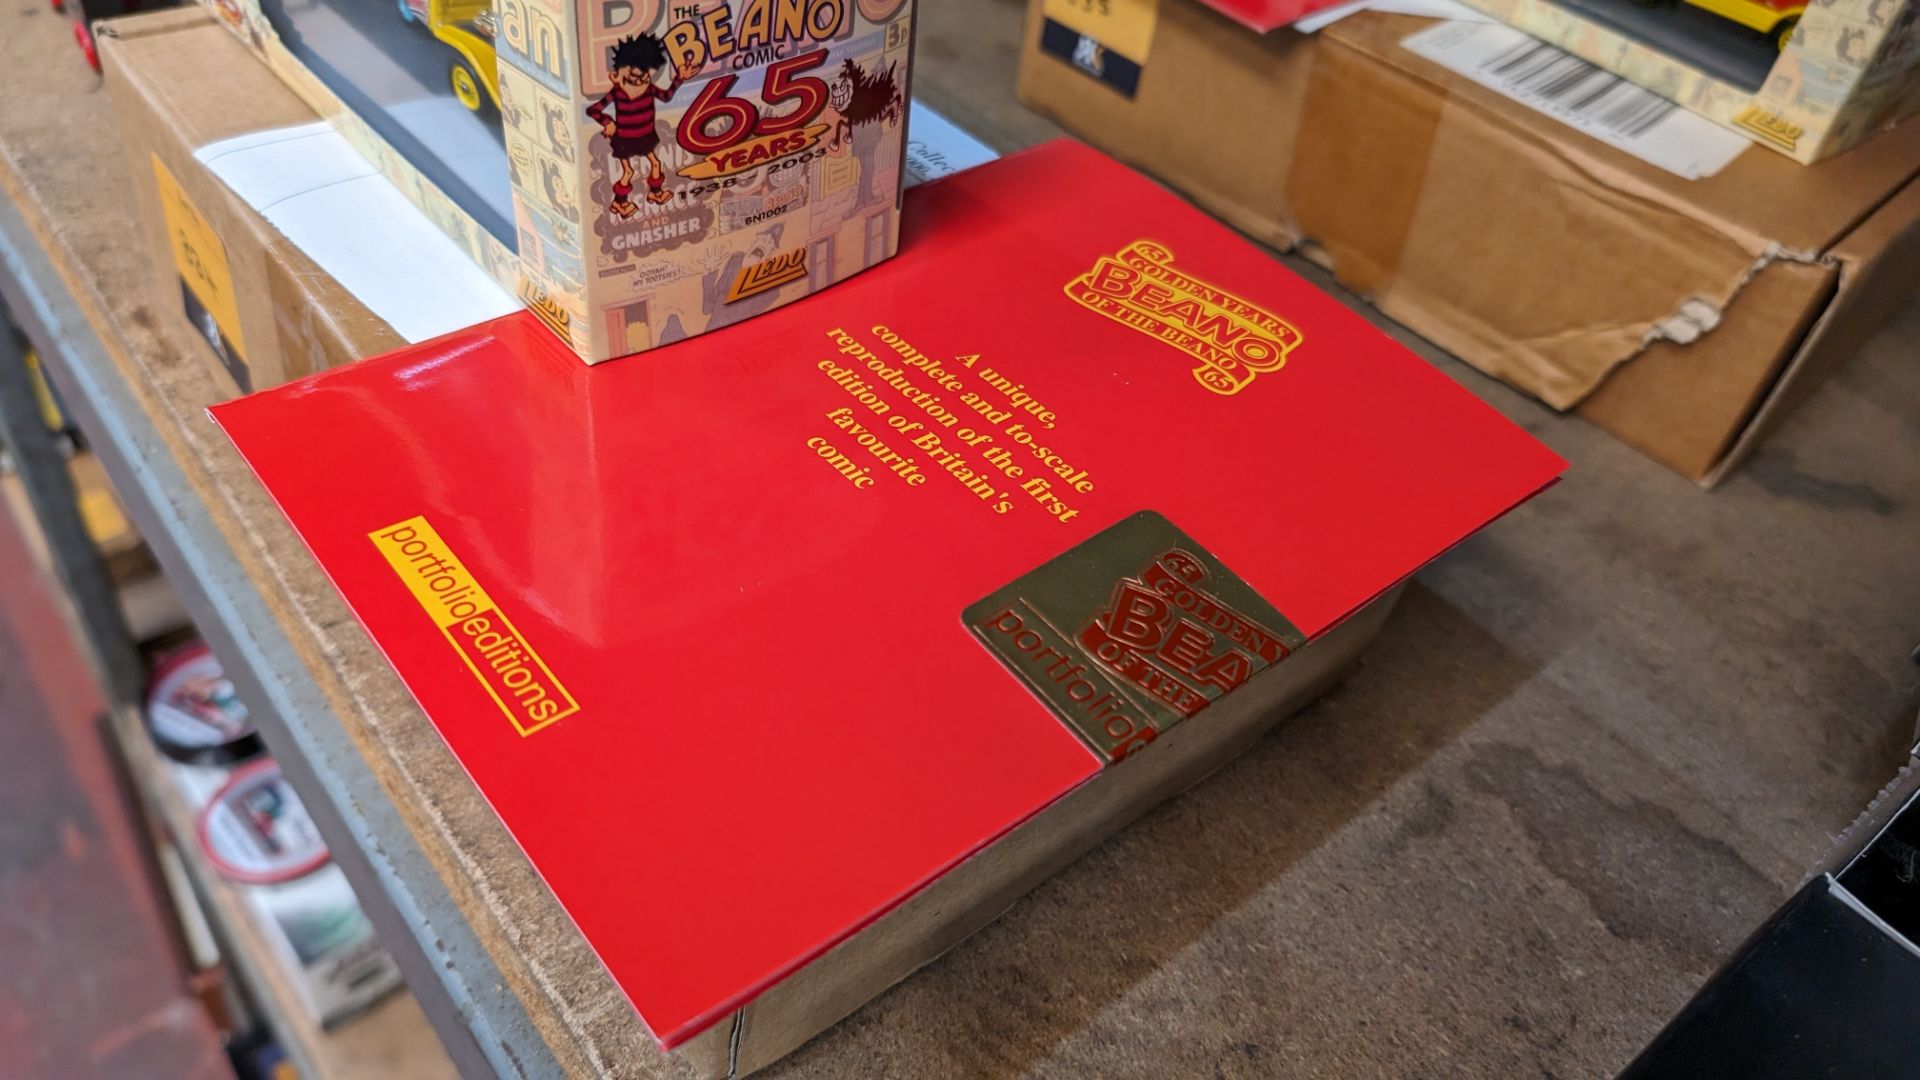 Beano 65th anniversary gift set including reproduction of the first edition of the comic plus 2 mode - Bild 5 aus 9